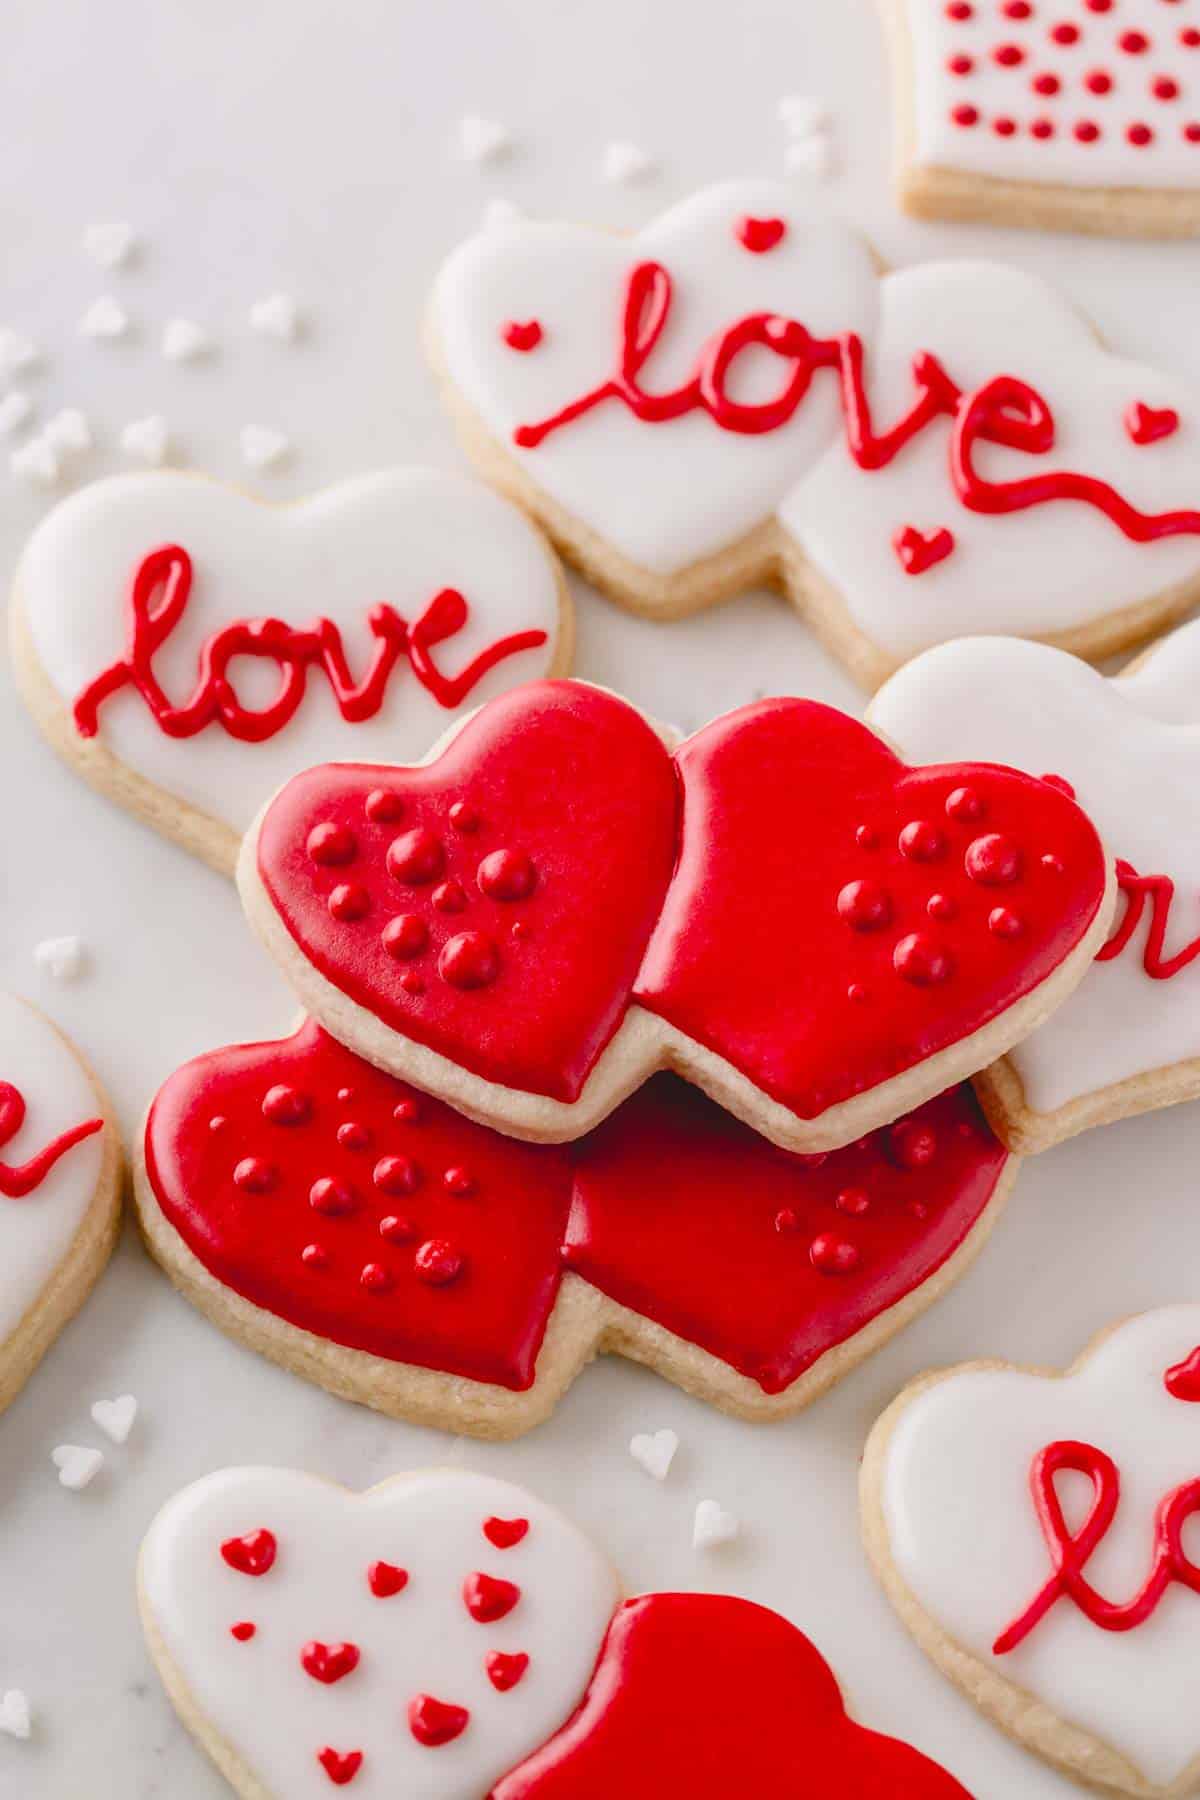 Heart-shaped Valentine's Day sugar cookies with red and white icing.